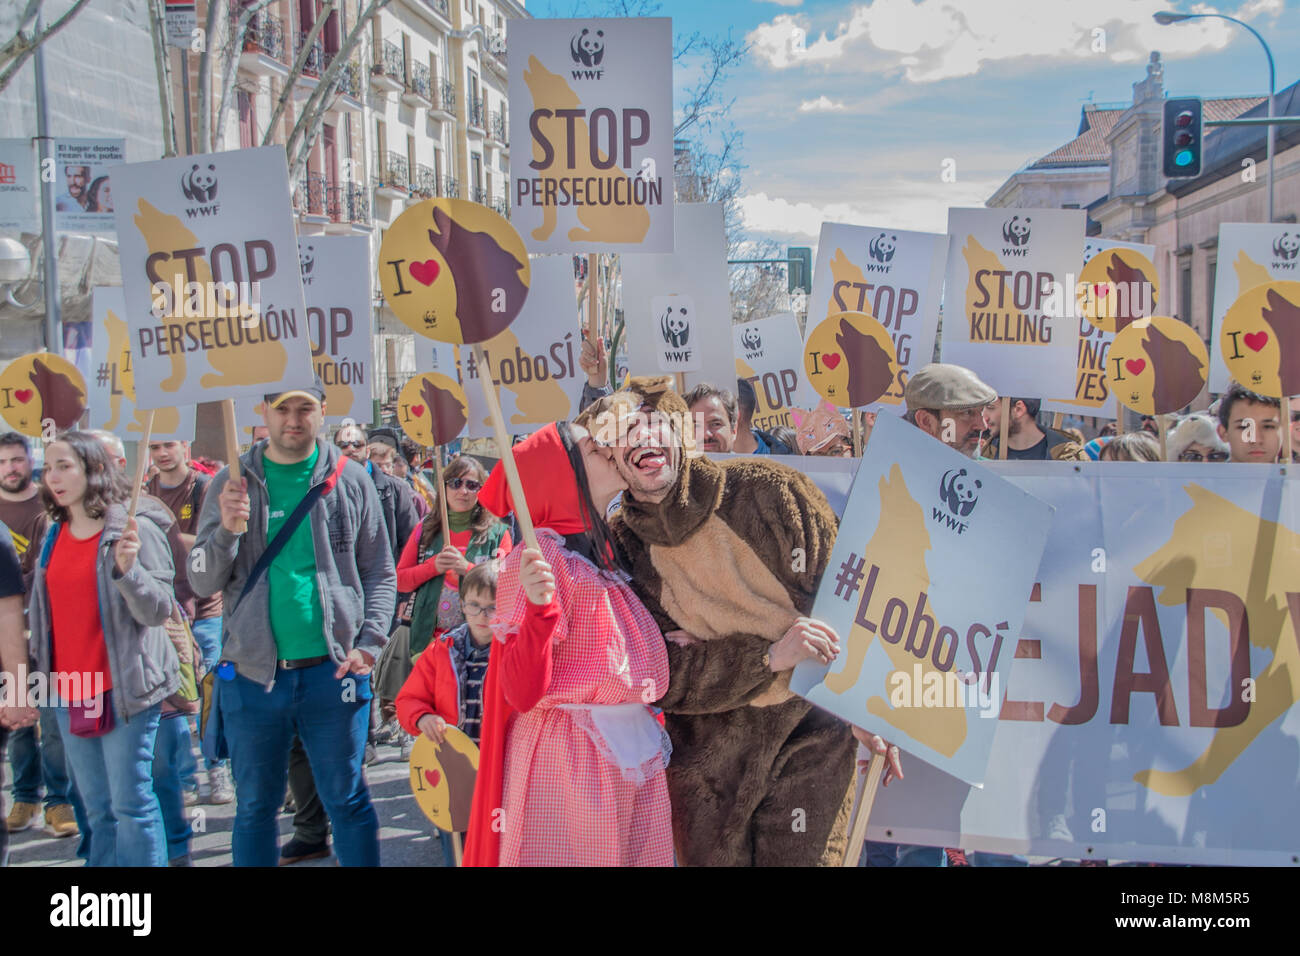 Madrid, Spain. 18th March, 2018. Animal organizations gathered hundreds of people to protest against the extermination of the Iberian Woolf, an endangered especies. Credit: Lora Grigorova/Alamy Live News Credit: Lora Grigorova/Alamy Live News Stock Photo